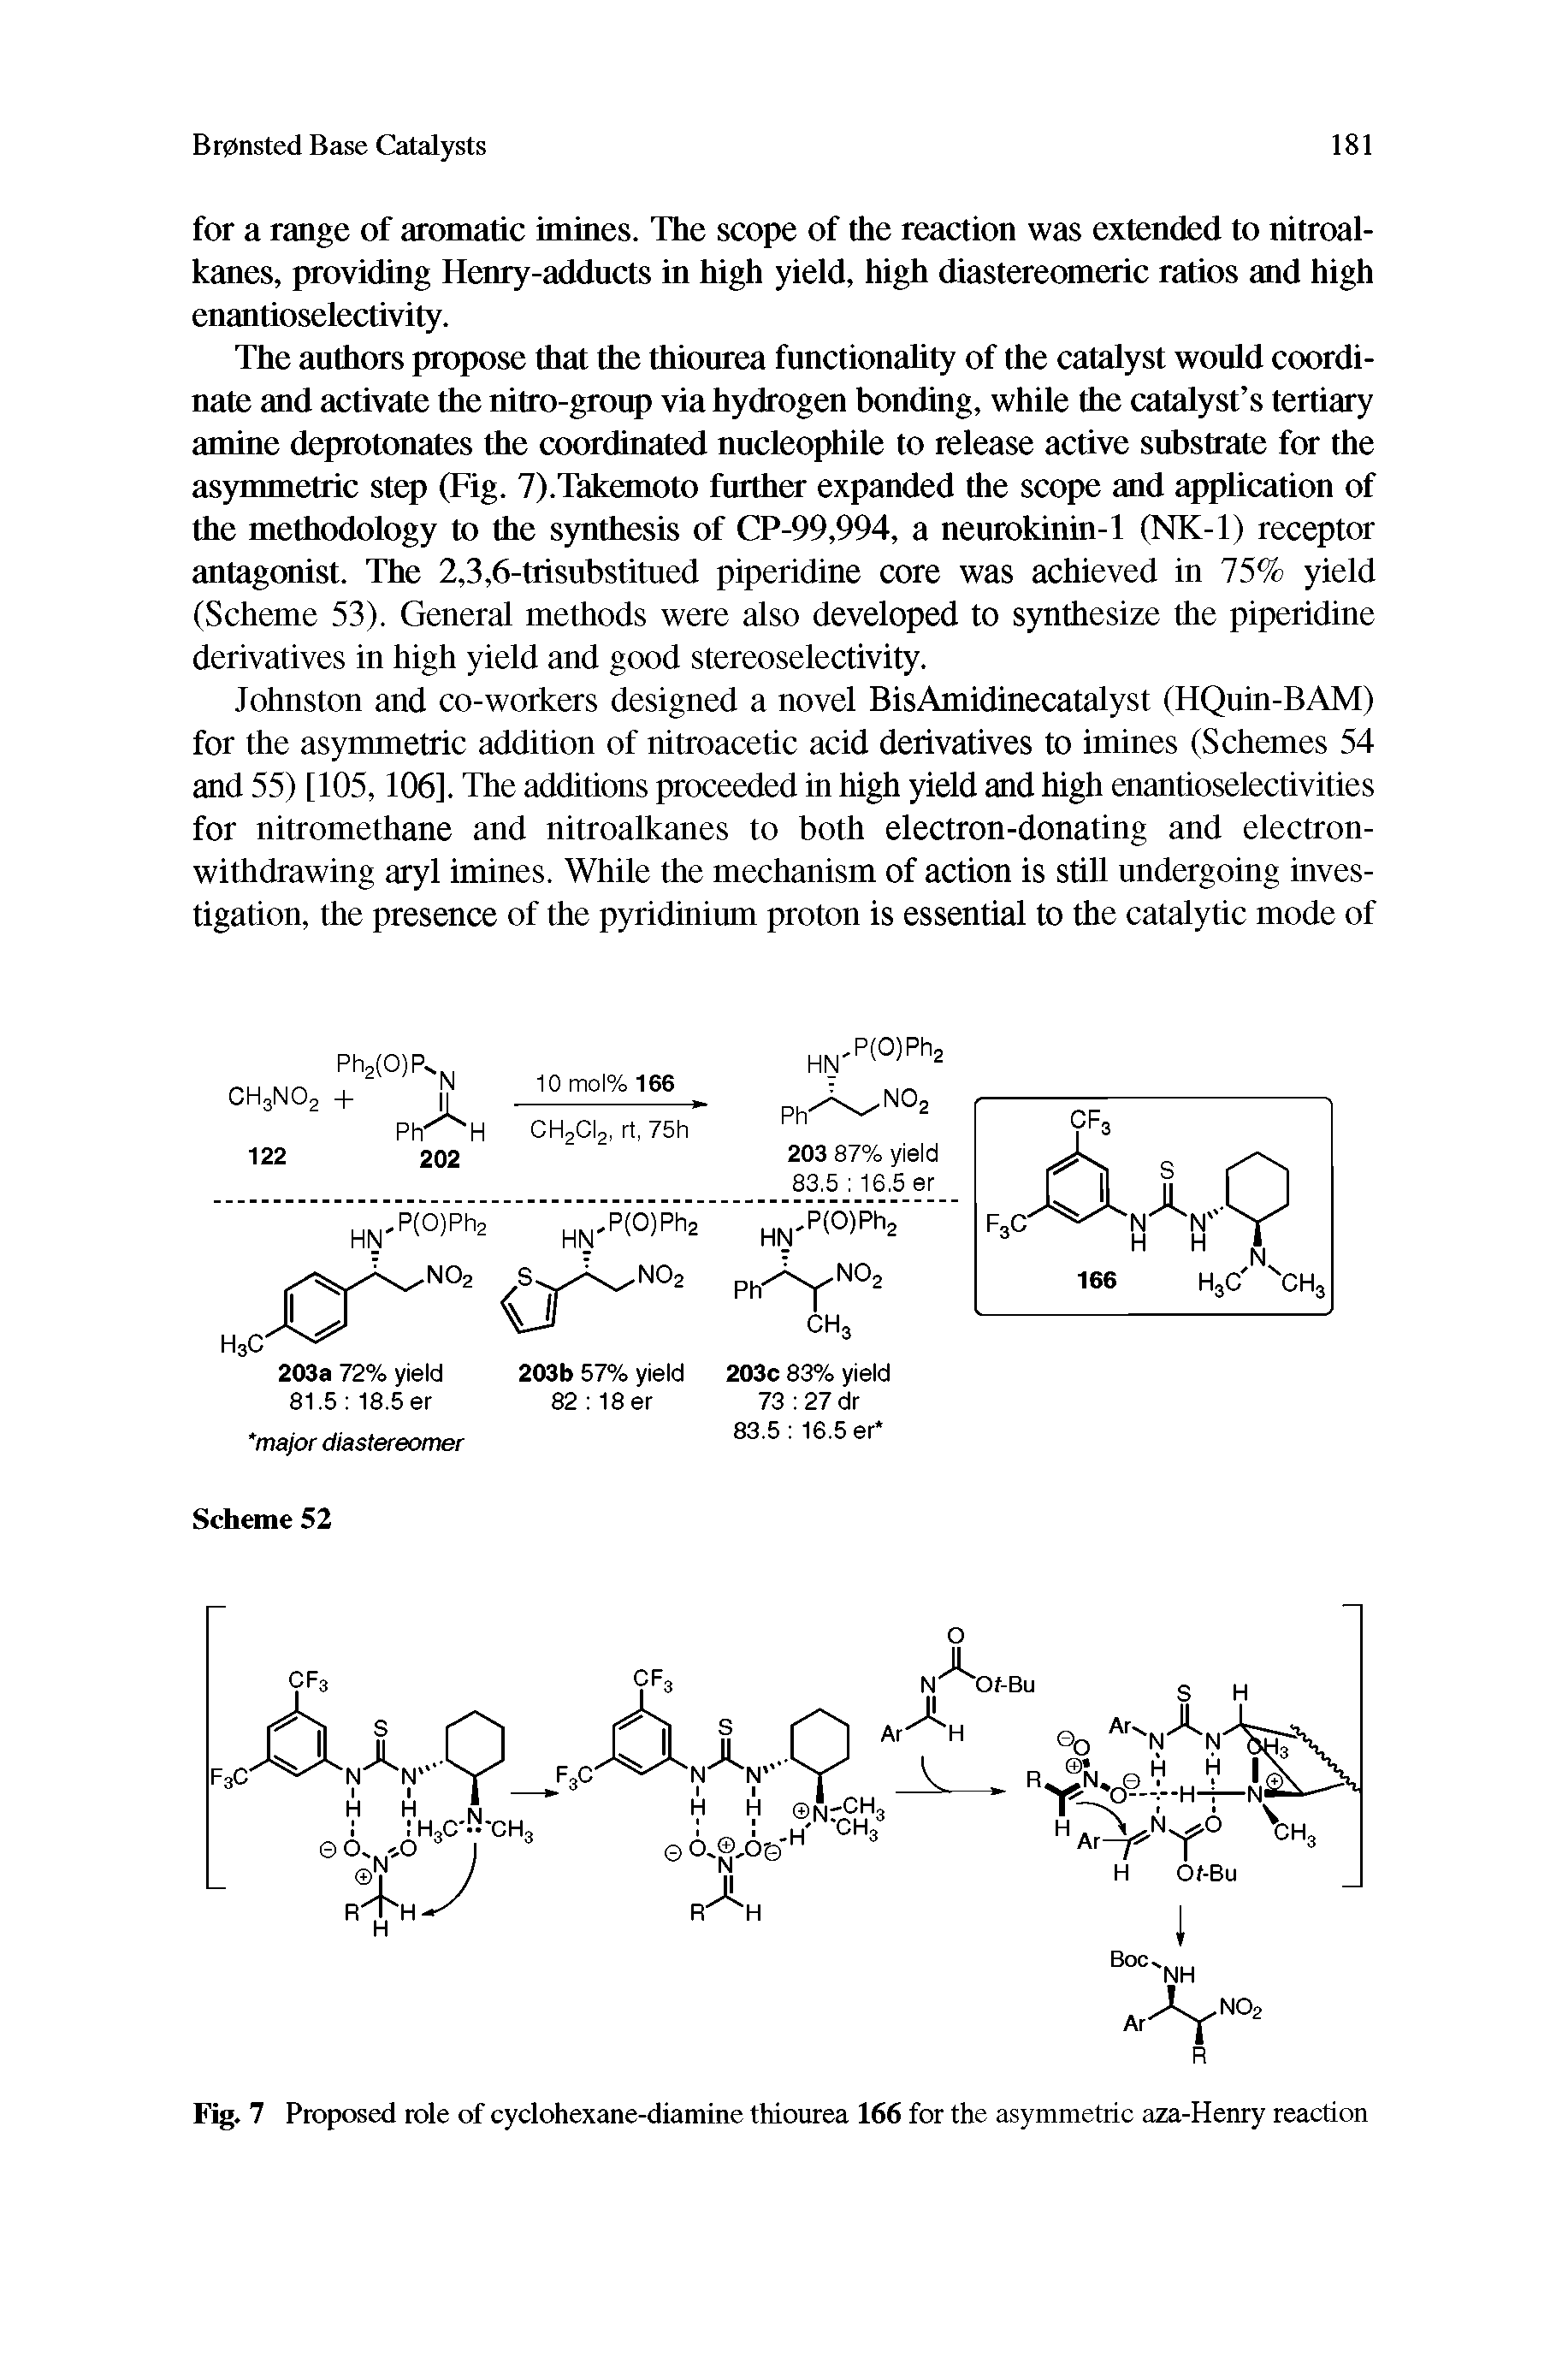 Fig. 7 Proposed role of cyclohexane-diamine thiourea 166 for the asymmetric aza-Henry reaction...